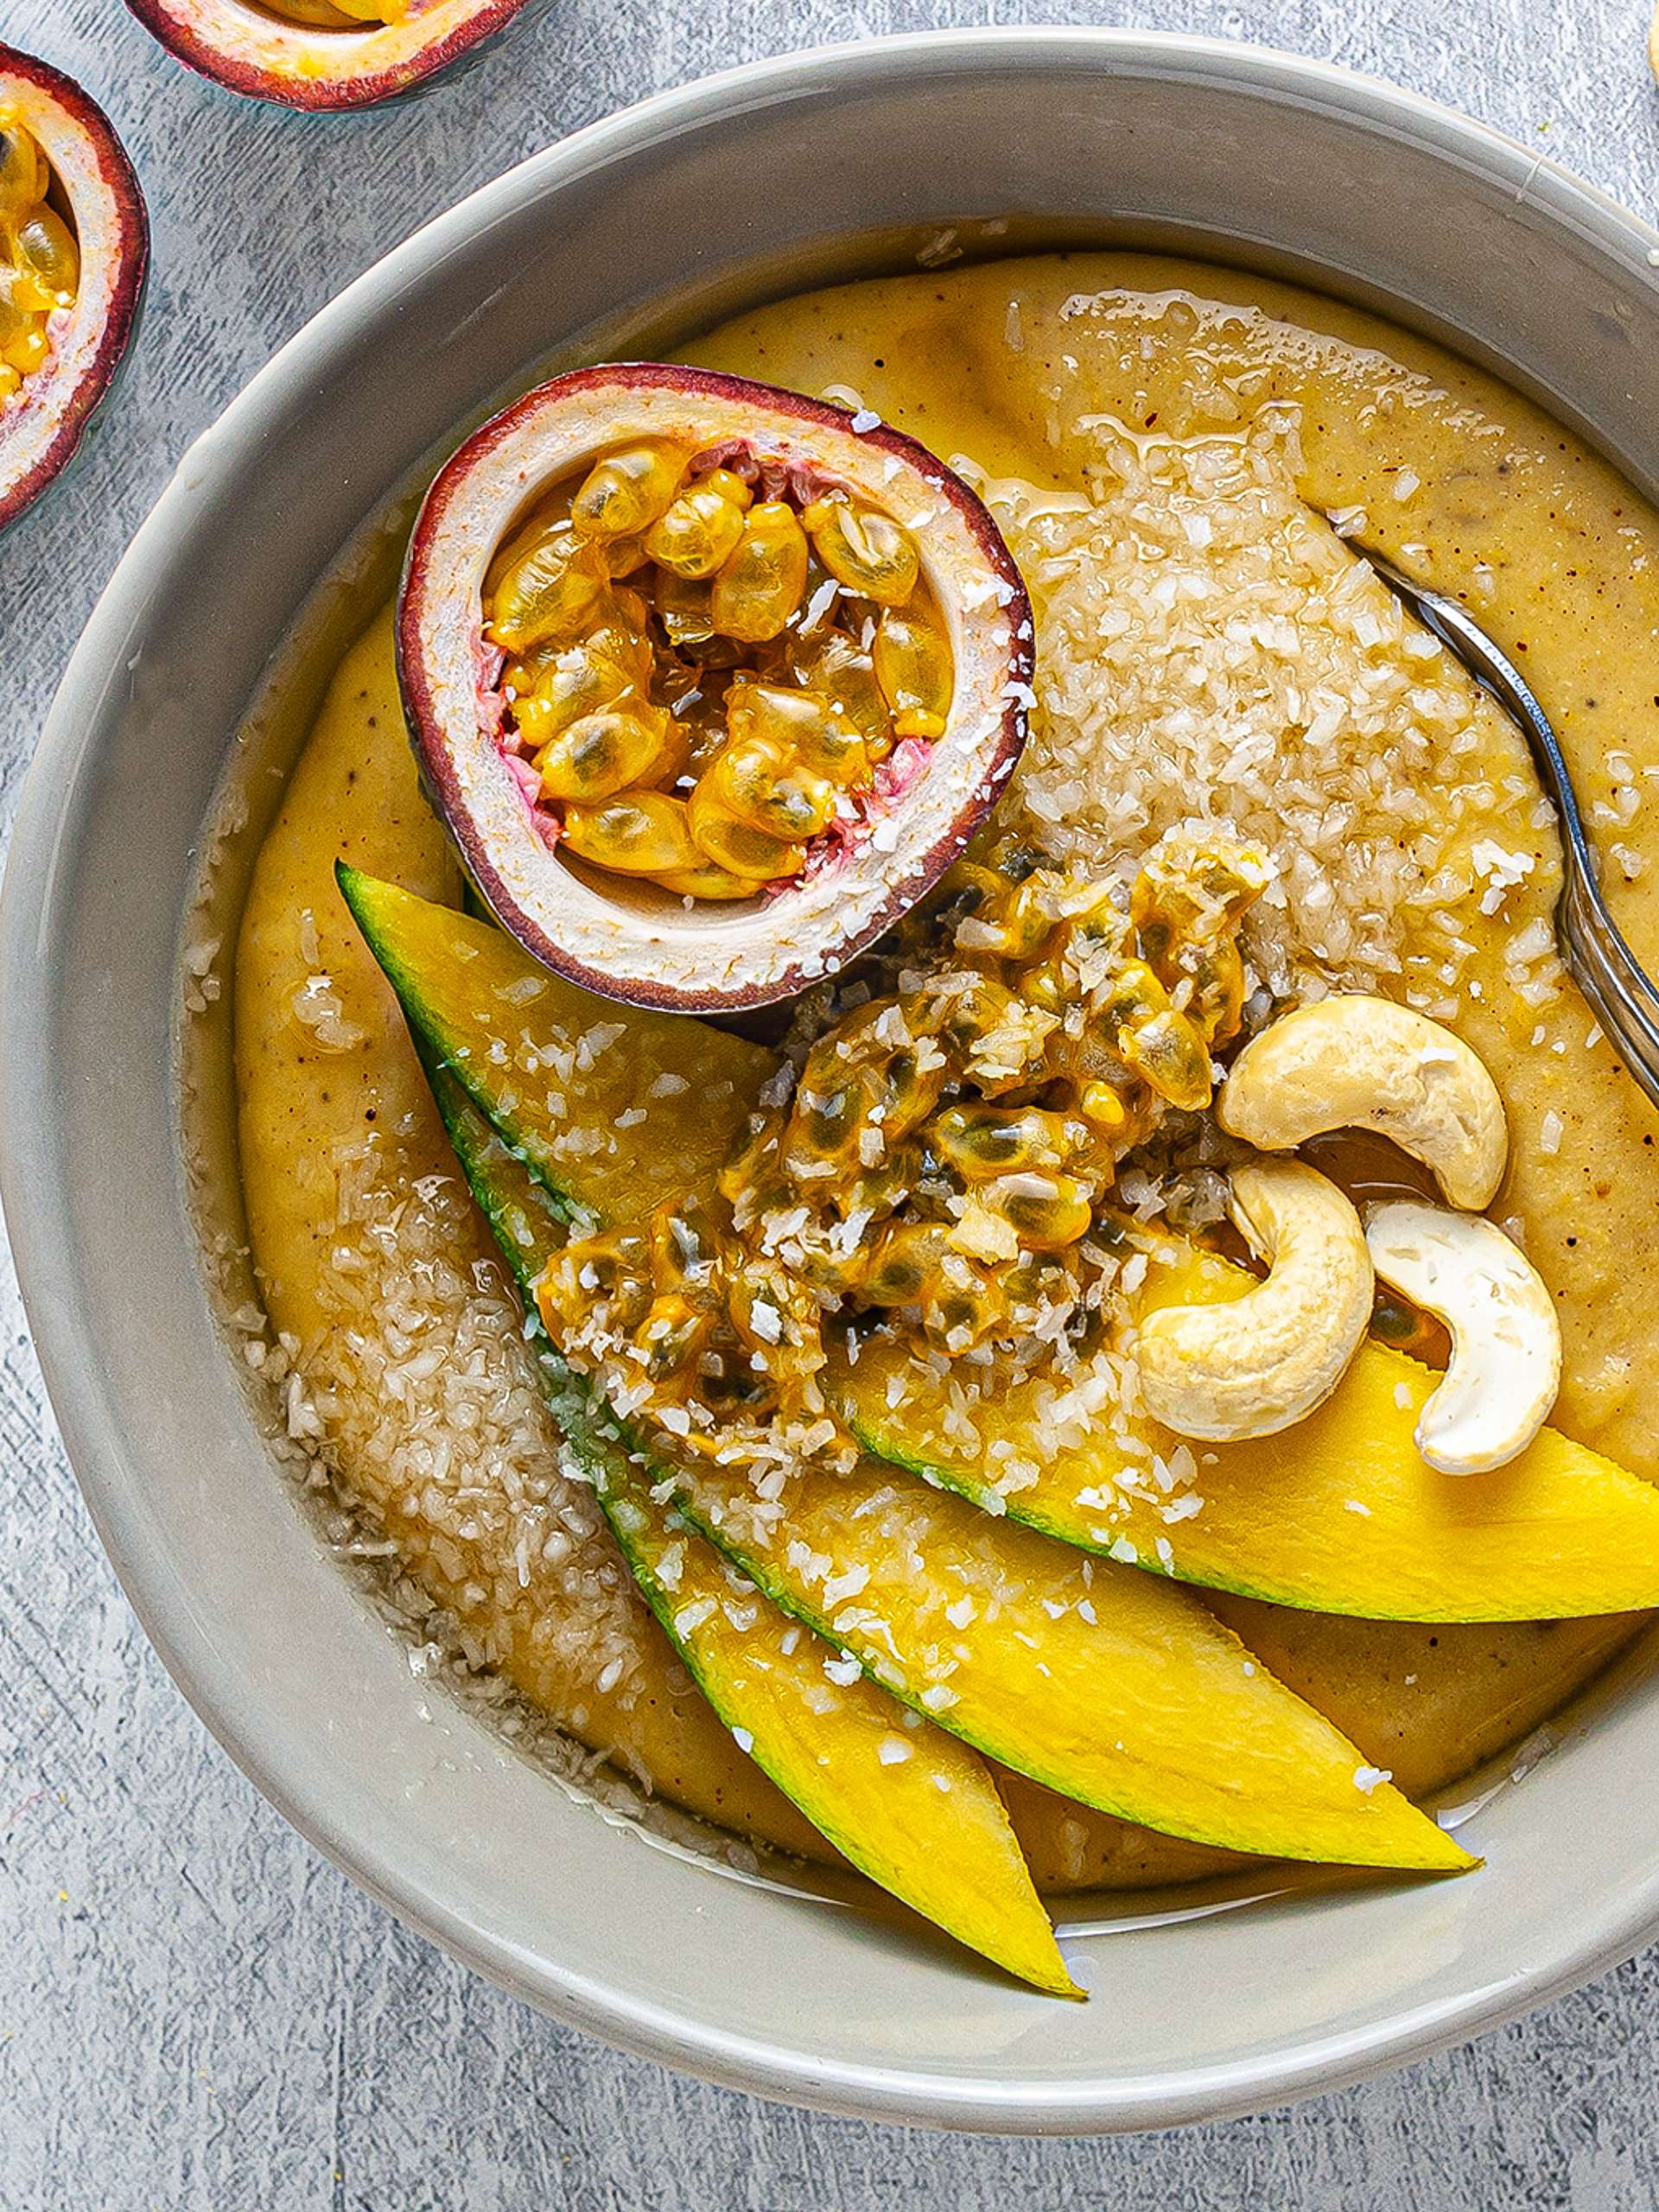 7 Delicious Ways to Use Passion Fruit